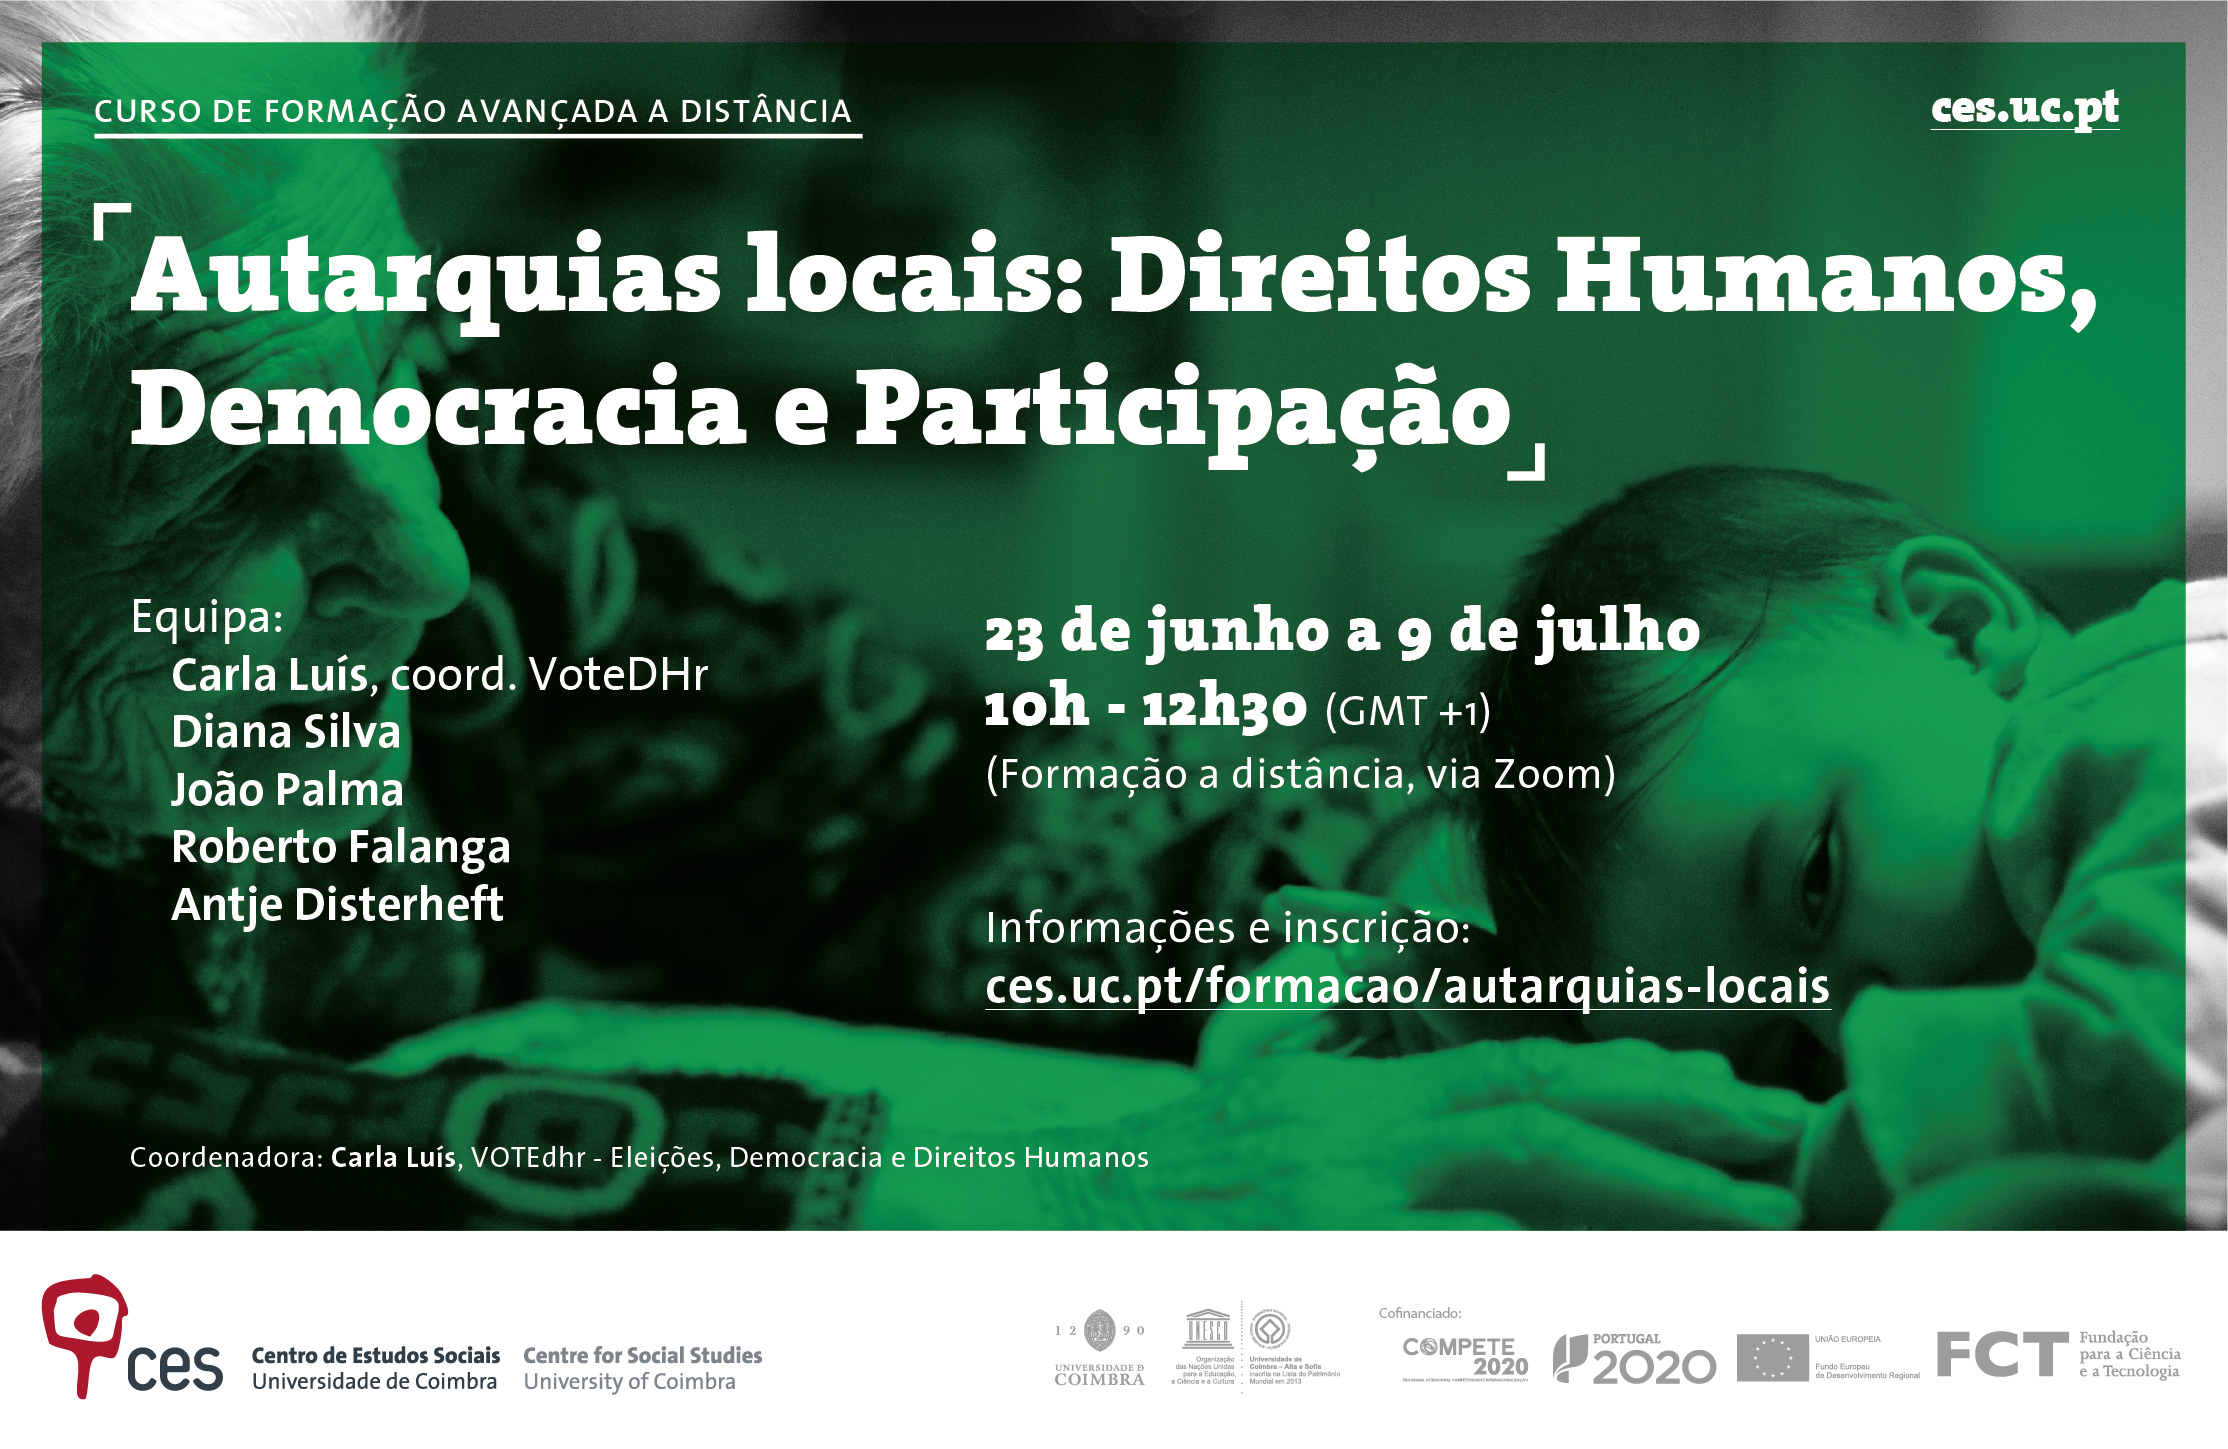 Local Authorities: Human Rights, Democracy and Participation <span id="edit_32760"><script>$(function() { $('#edit_32760').load( "/myces/user/editobj.php?tipo=evento&id=32760" ); });</script></span>